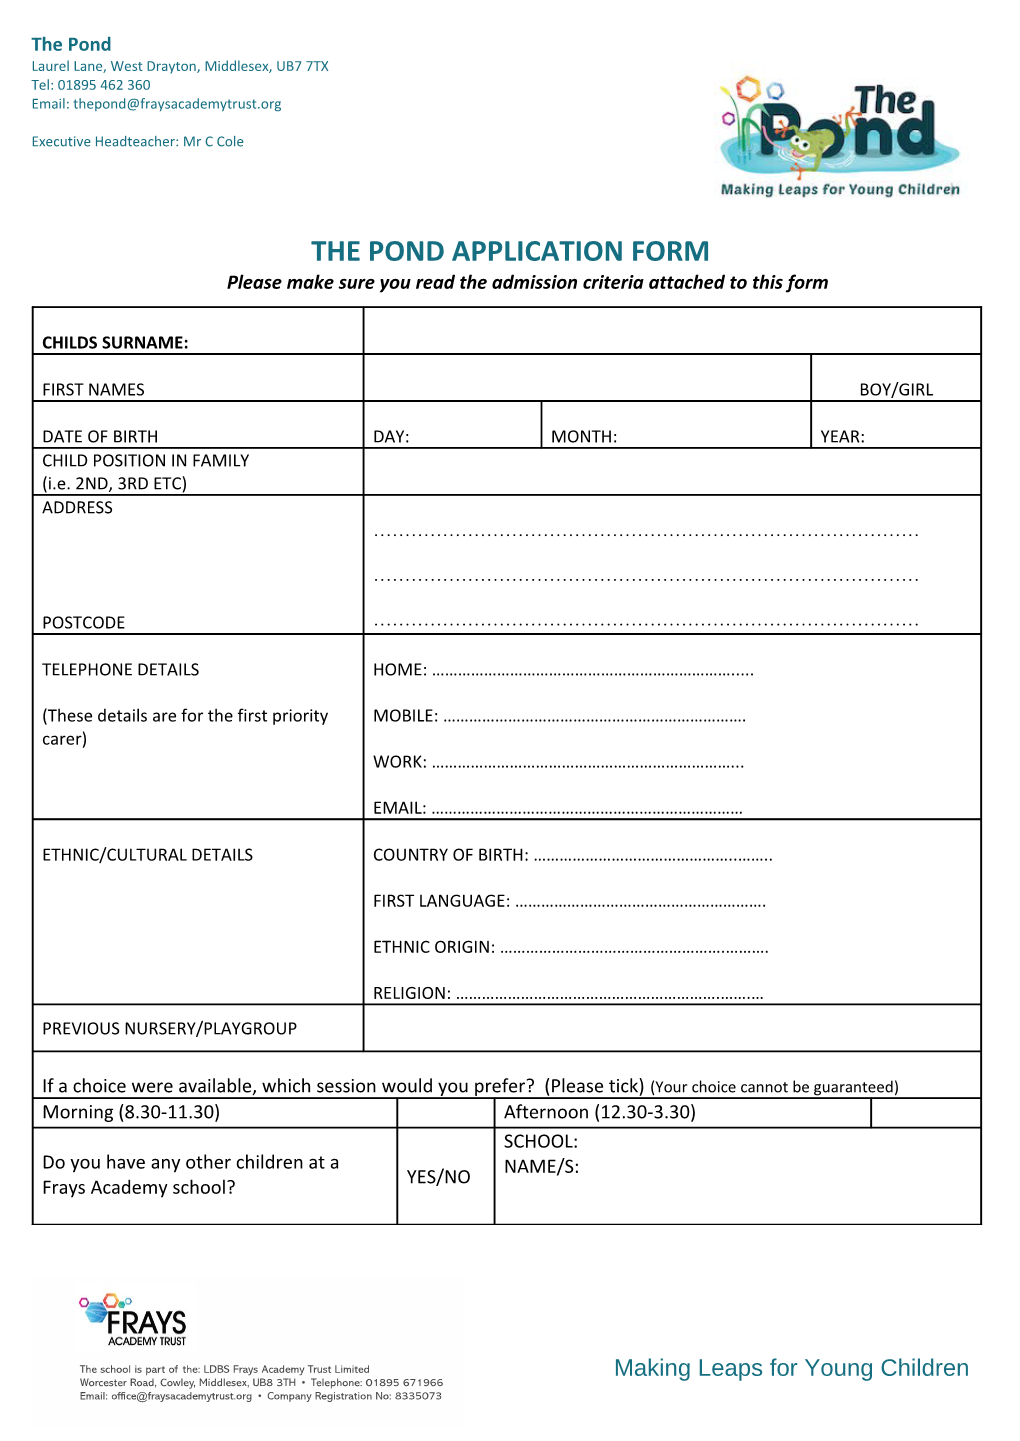 The Pond Application Form